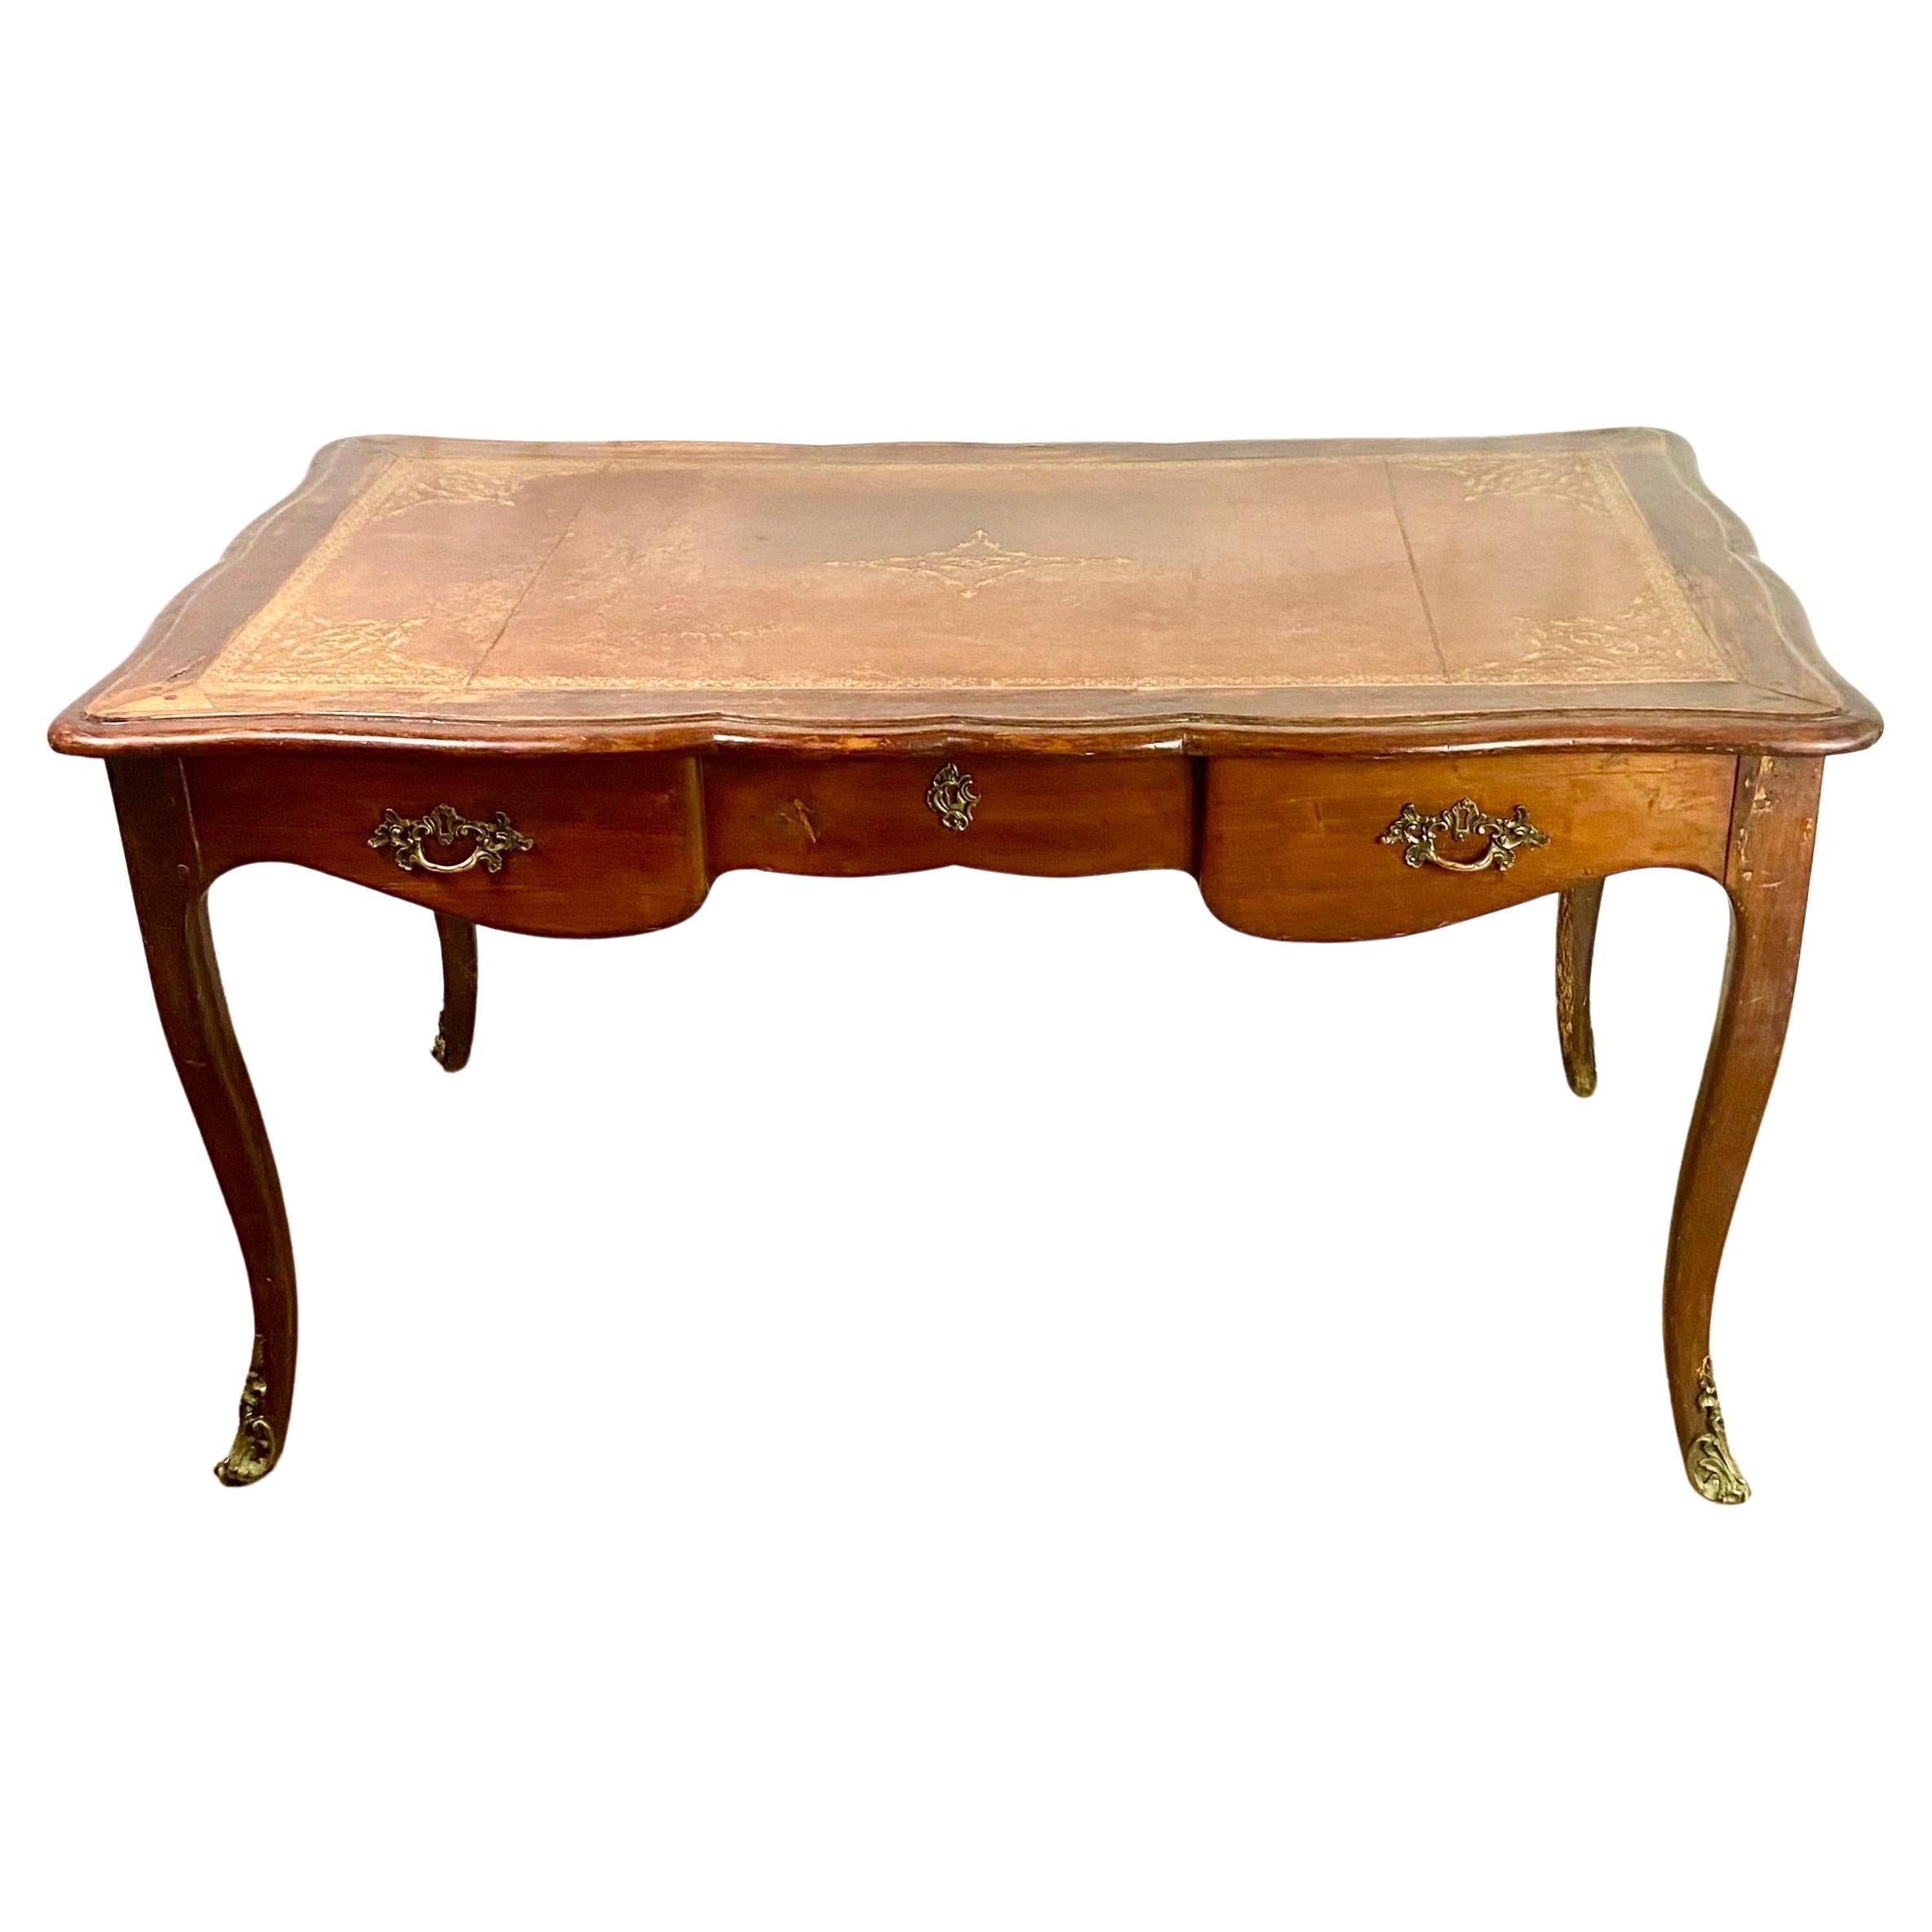 Very beautiful flat desk with belt drawers and side pulls from the Louis XV period of the 18th century.
Its pretty curved shape makes it a very elegant desk.
It has 3 opening drawers on the front with their key and 3 false drawers identical to the